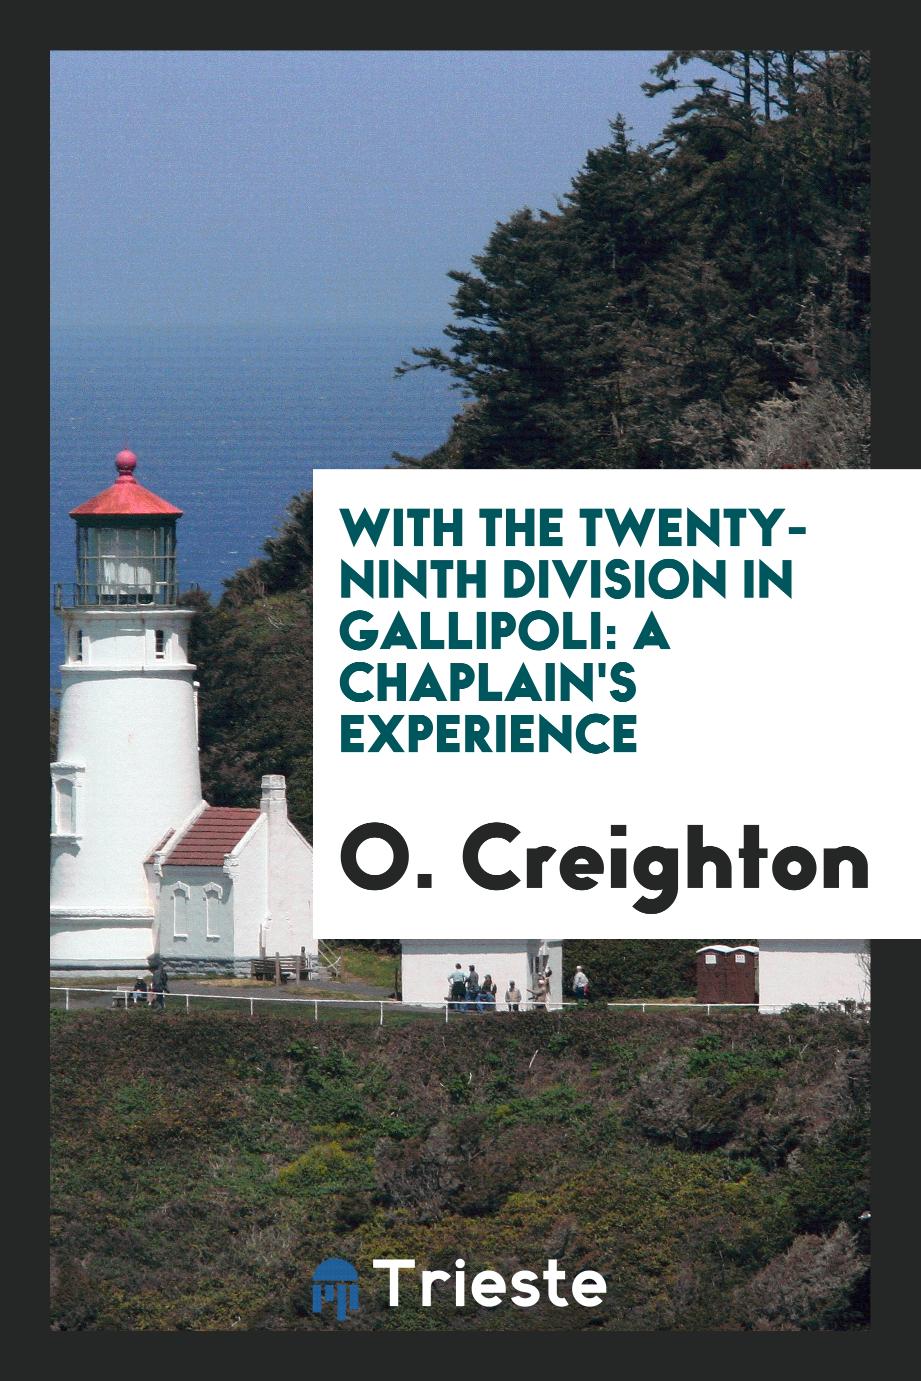 With the Twenty-ninth division in Gallipoli: a chaplain's experience